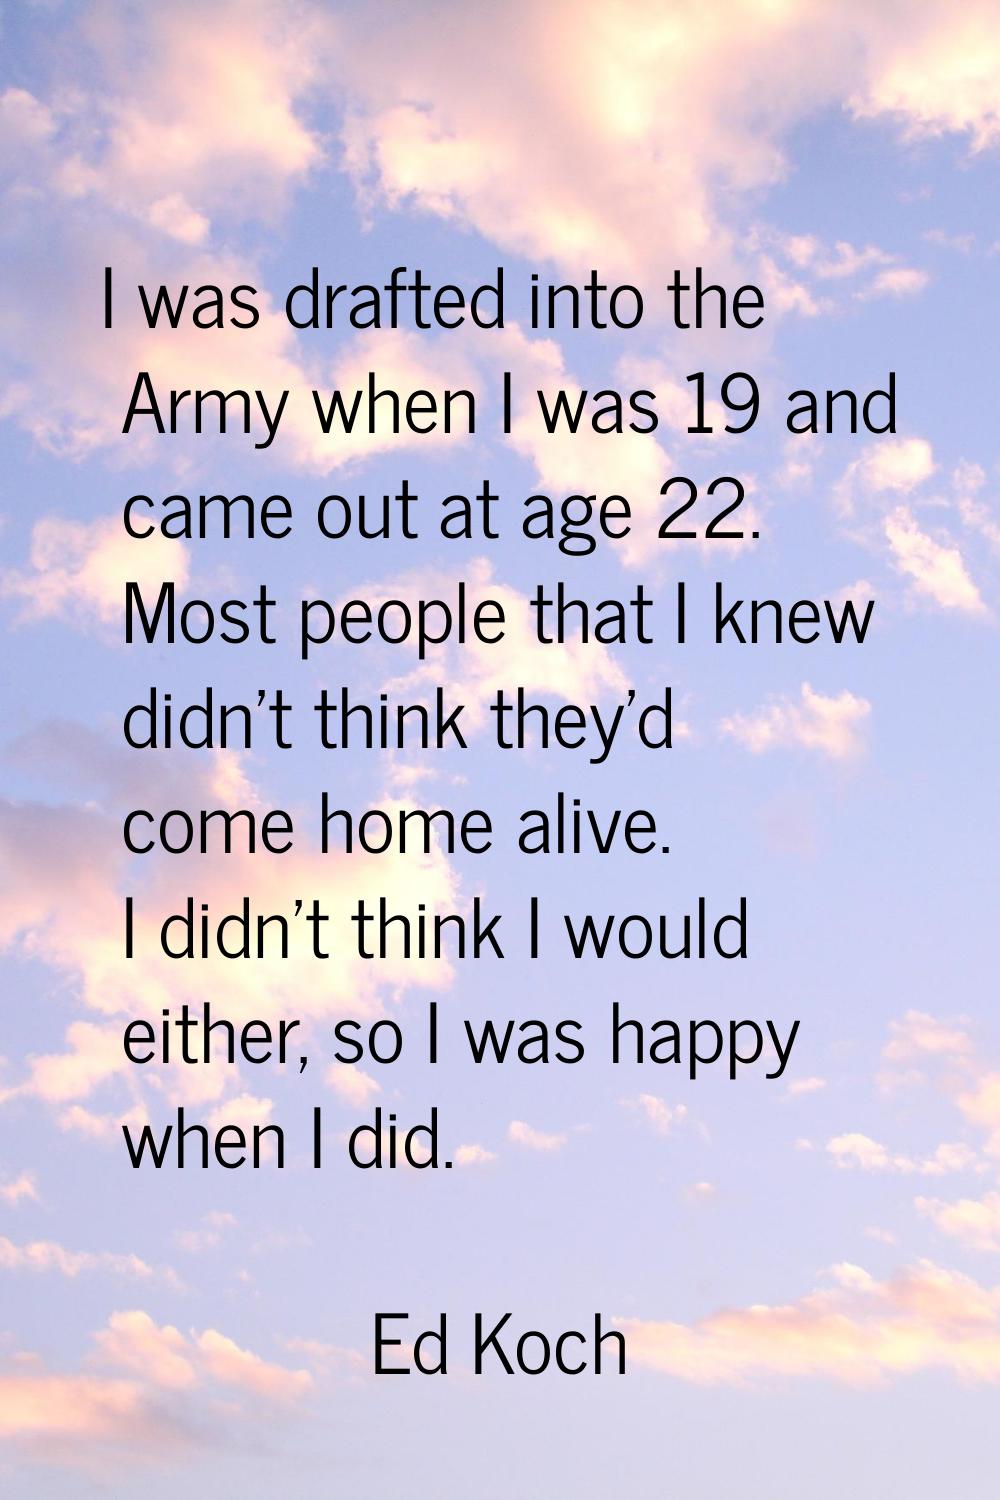 I was drafted into the Army when I was 19 and came out at age 22. Most people that I knew didn't th